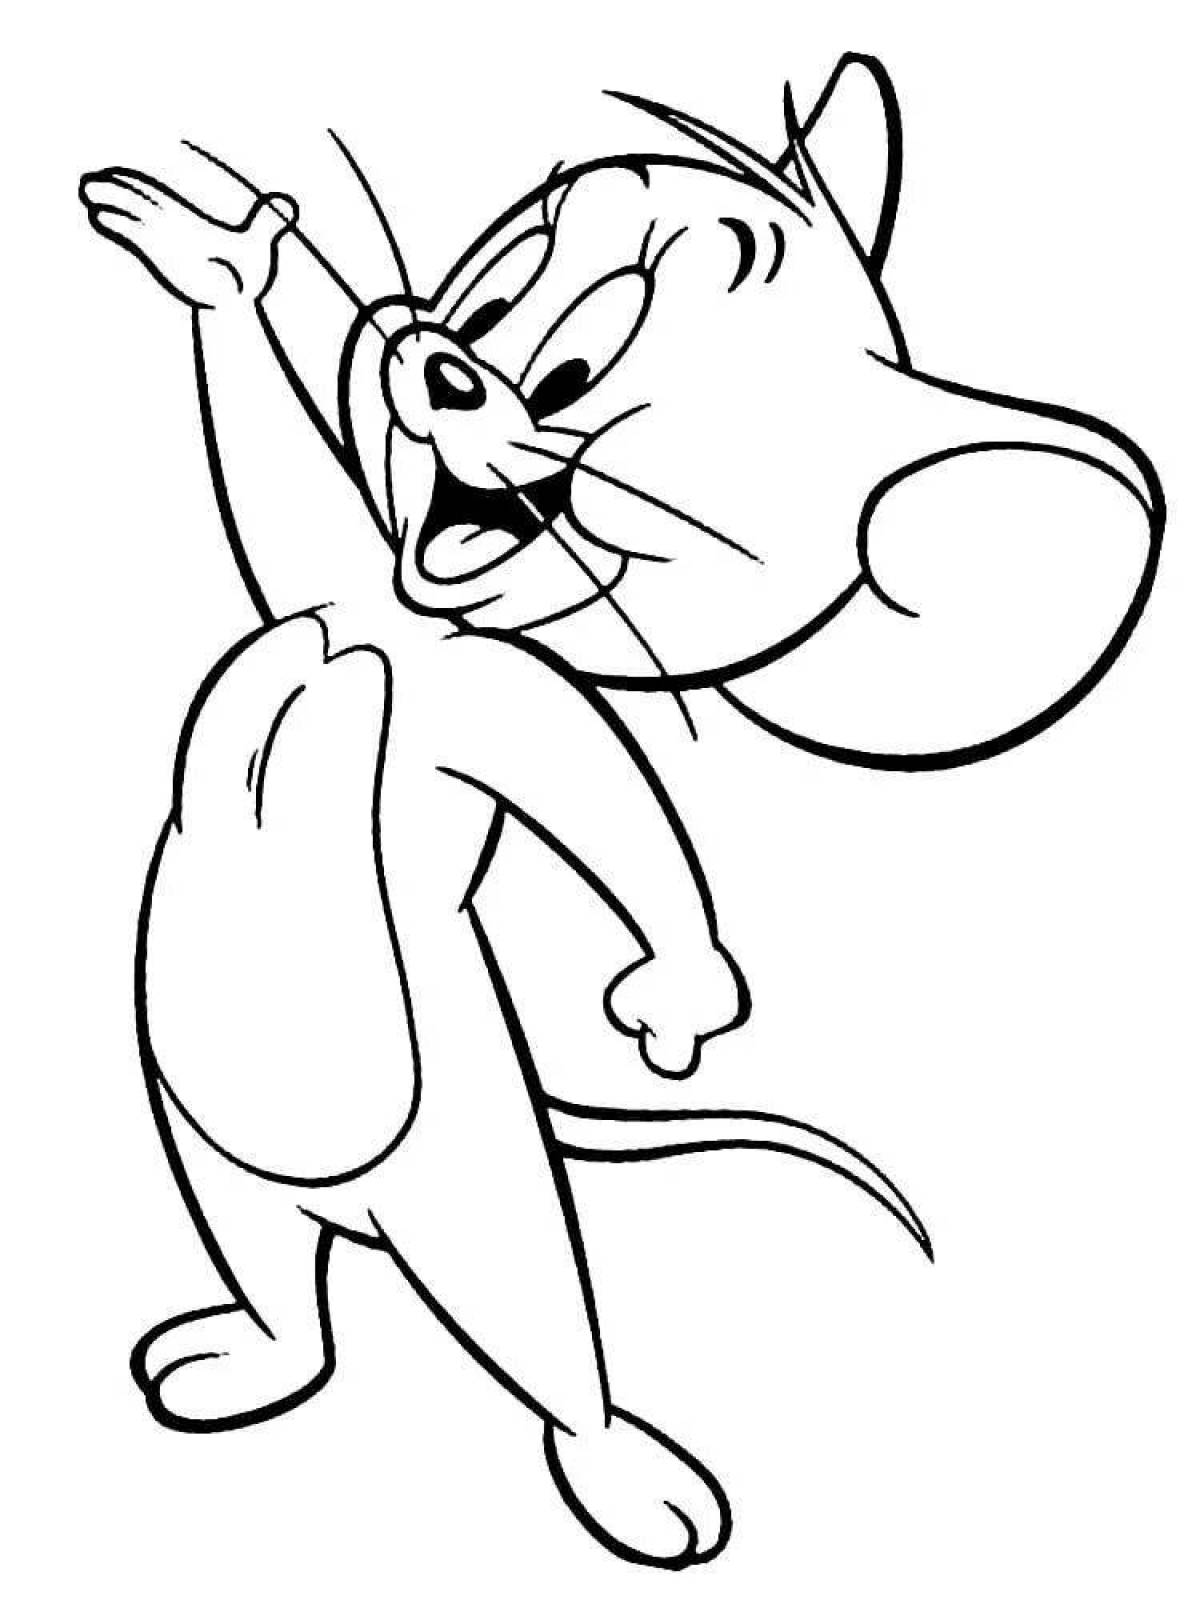 Fancy tom and jerry coloring book